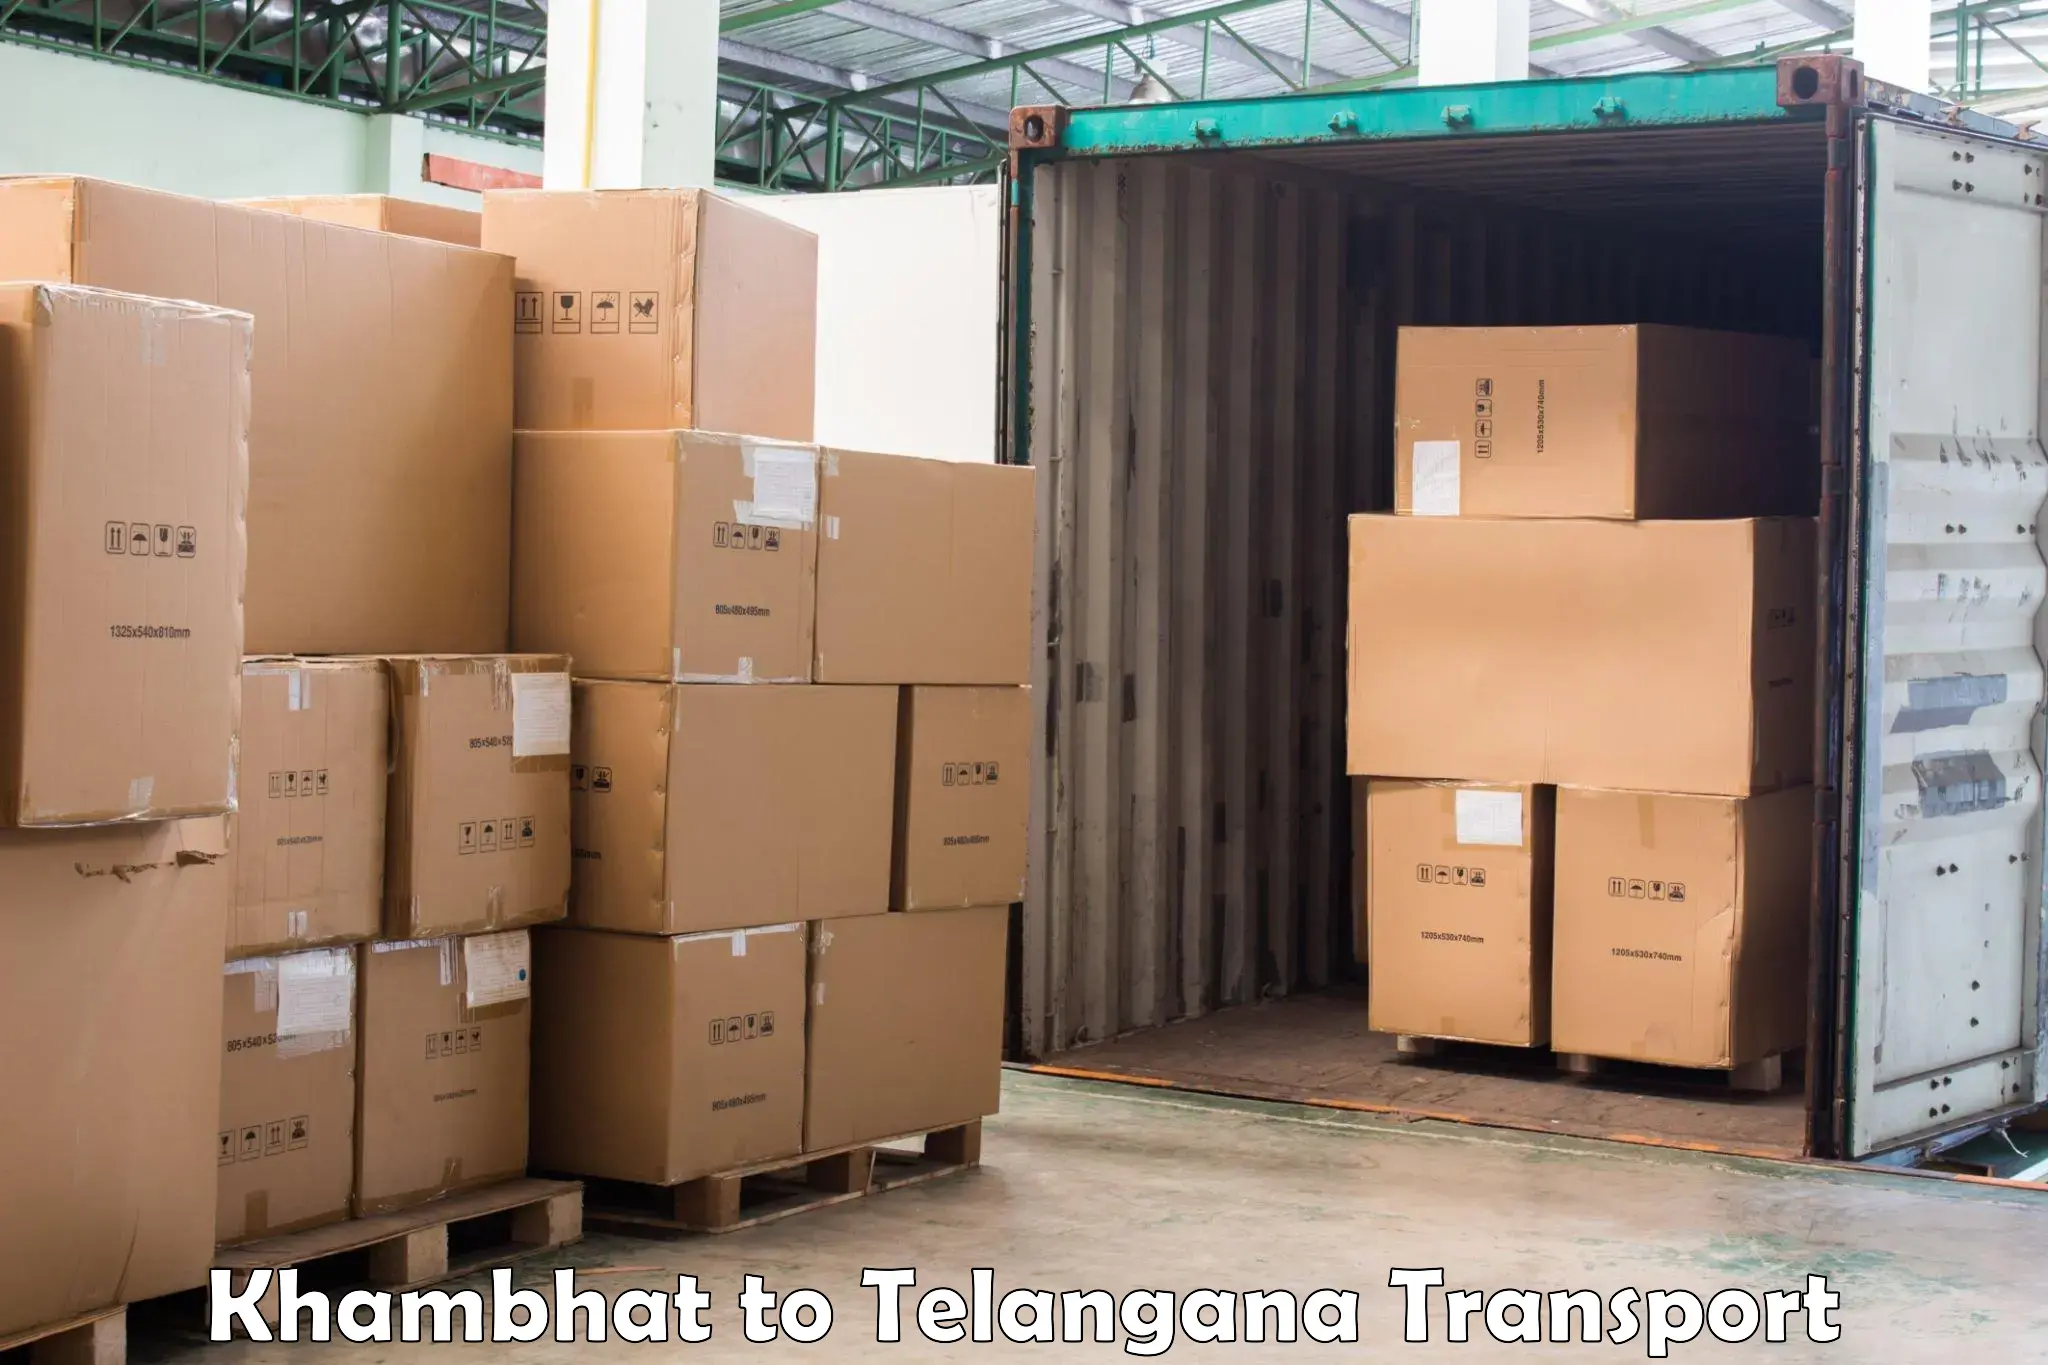 Air freight transport services in Khambhat to Yellareddy